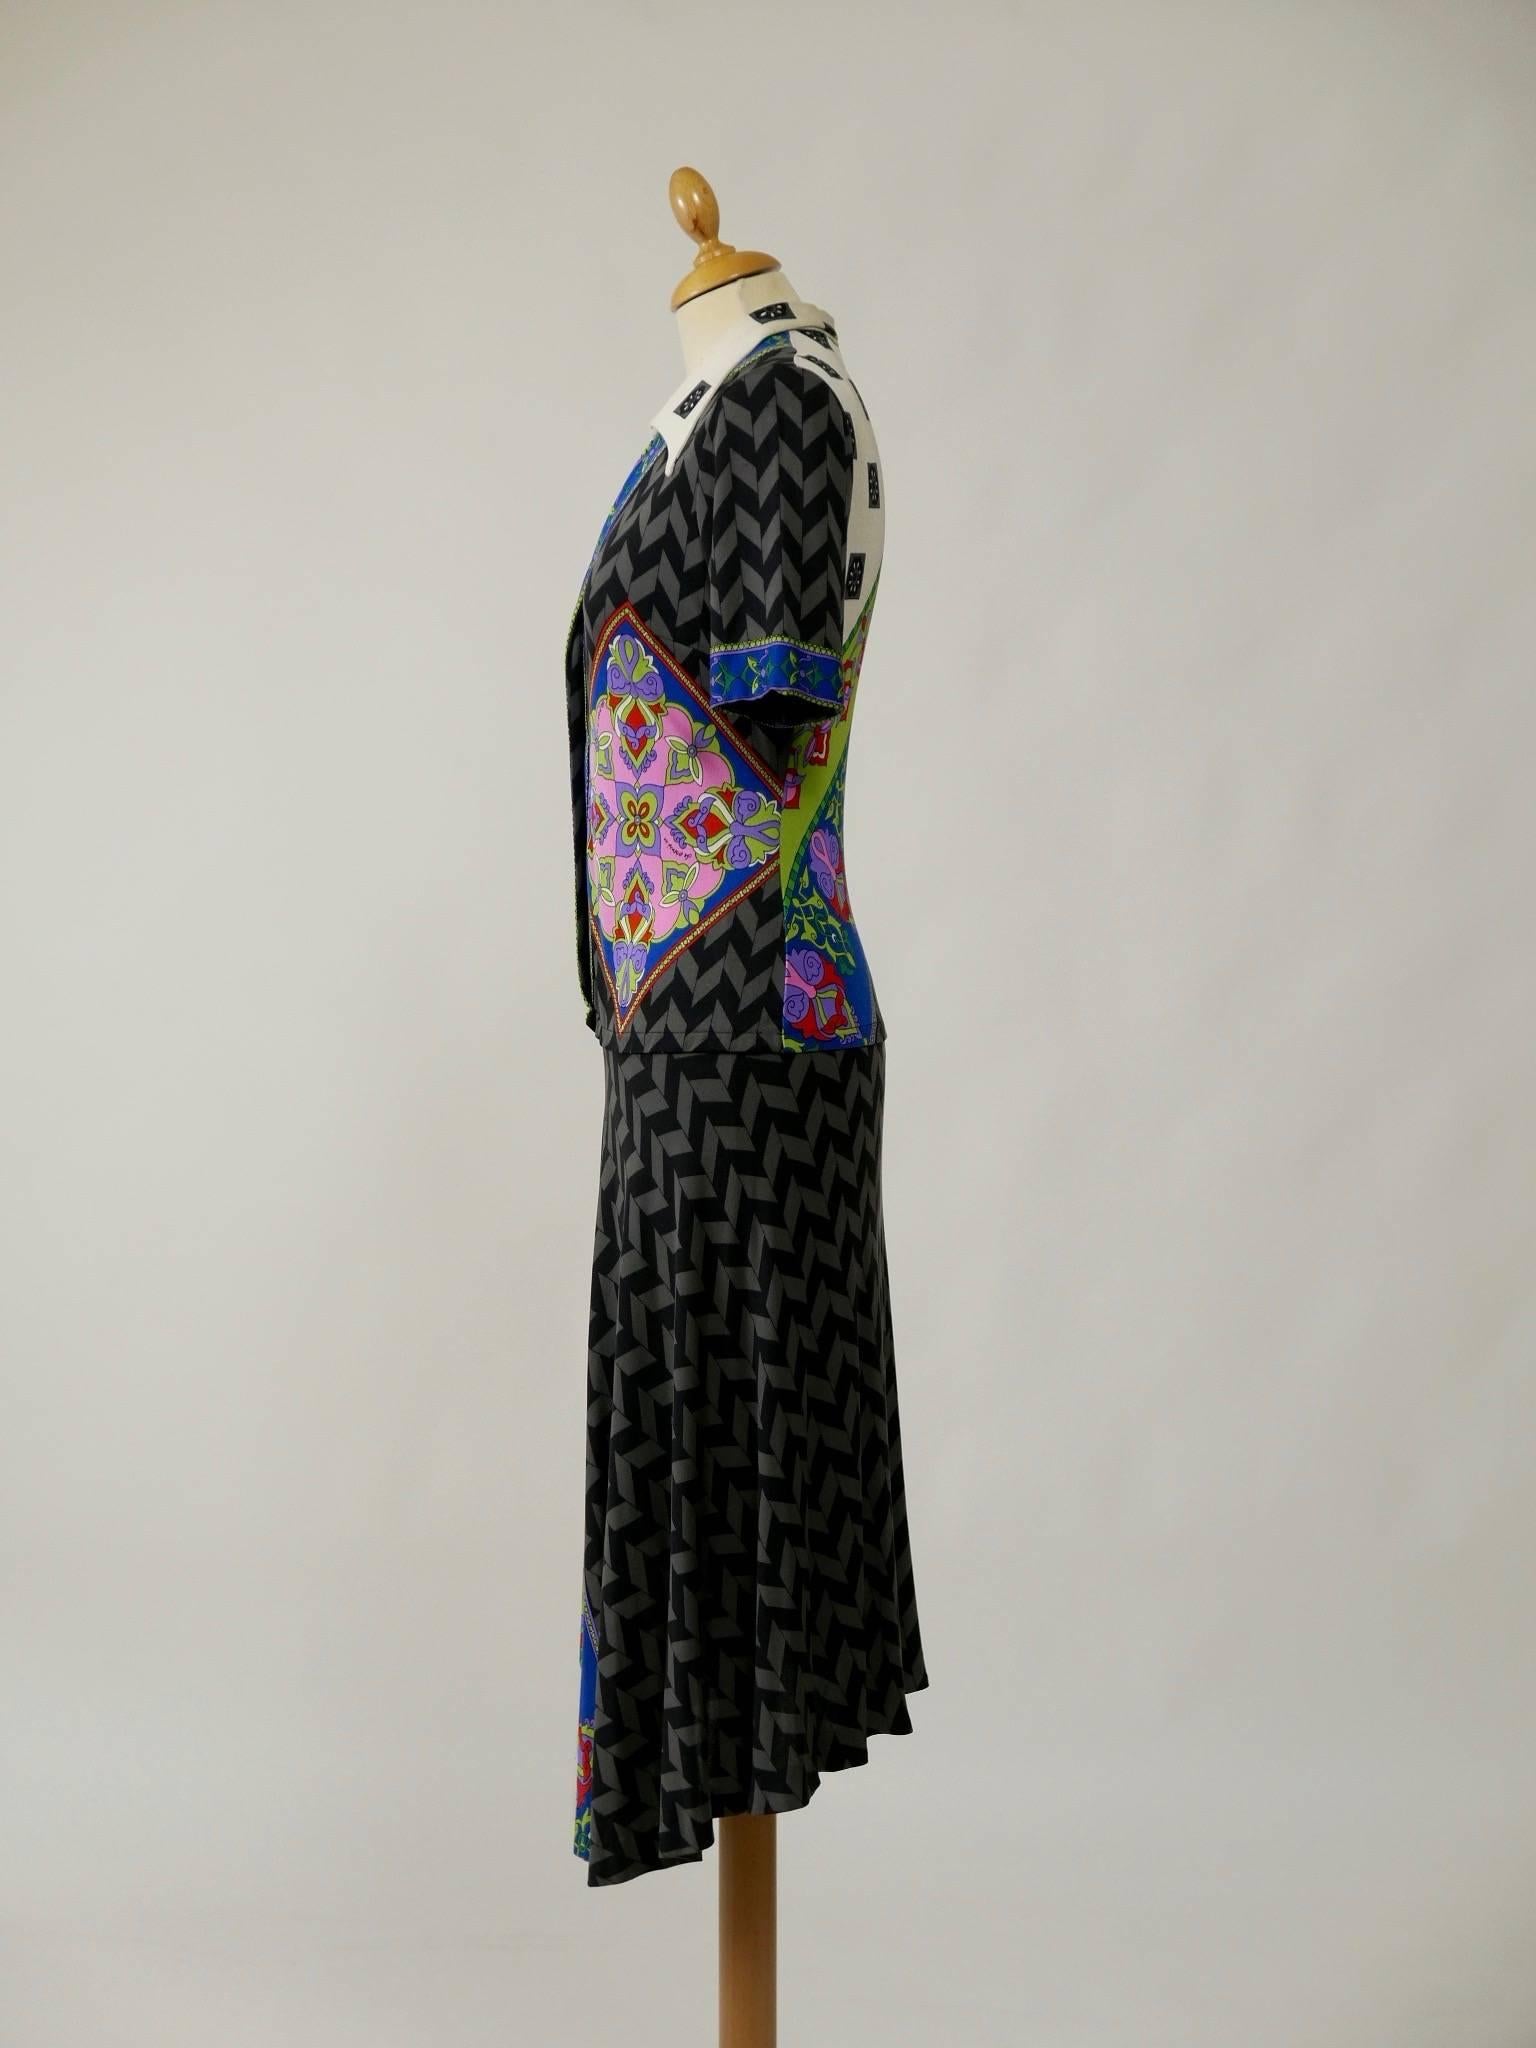 This stunning 1970s De Parisini signed dress is made of silk jersey knit. Exotic and colorful Pucci style floral print with a contrasting optical black and grey print. Collar tips and front closure with covered buttons. 

Notes: De Parisini of